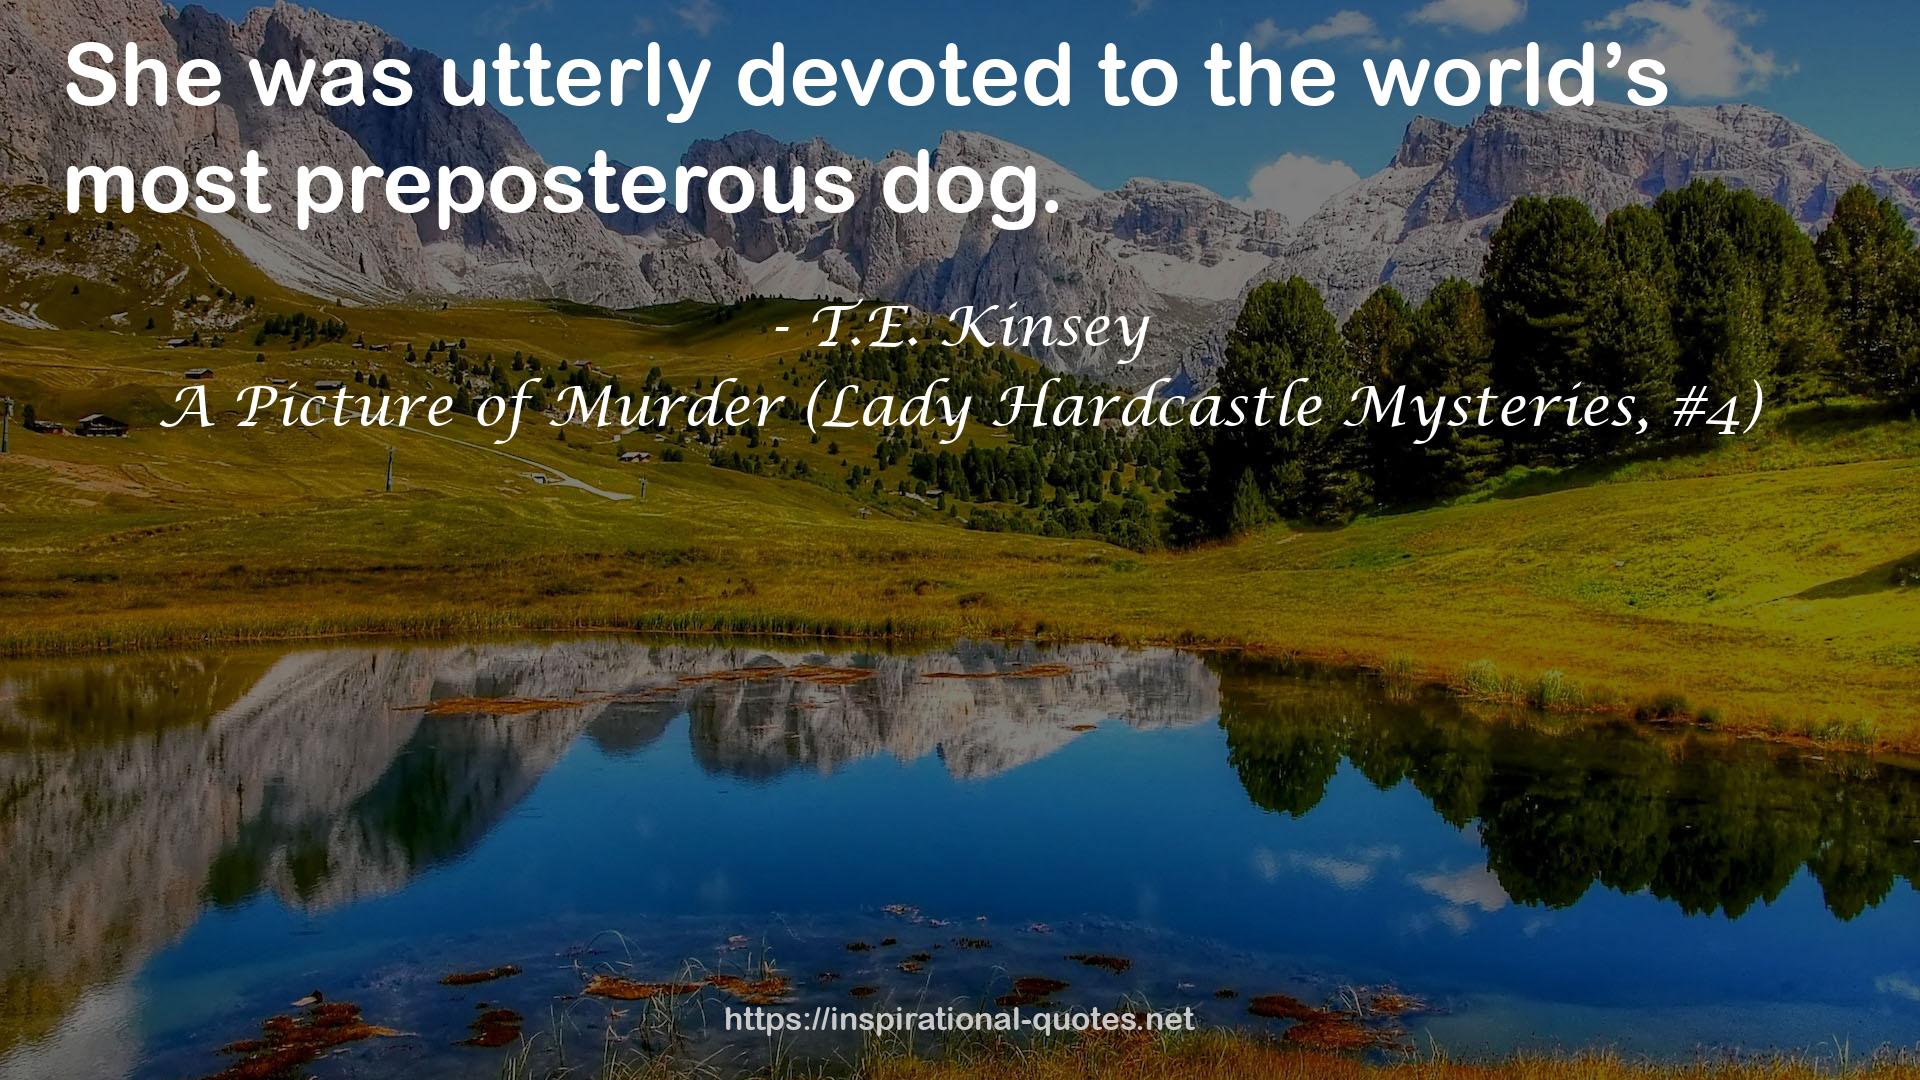 A Picture of Murder (Lady Hardcastle Mysteries, #4) QUOTES